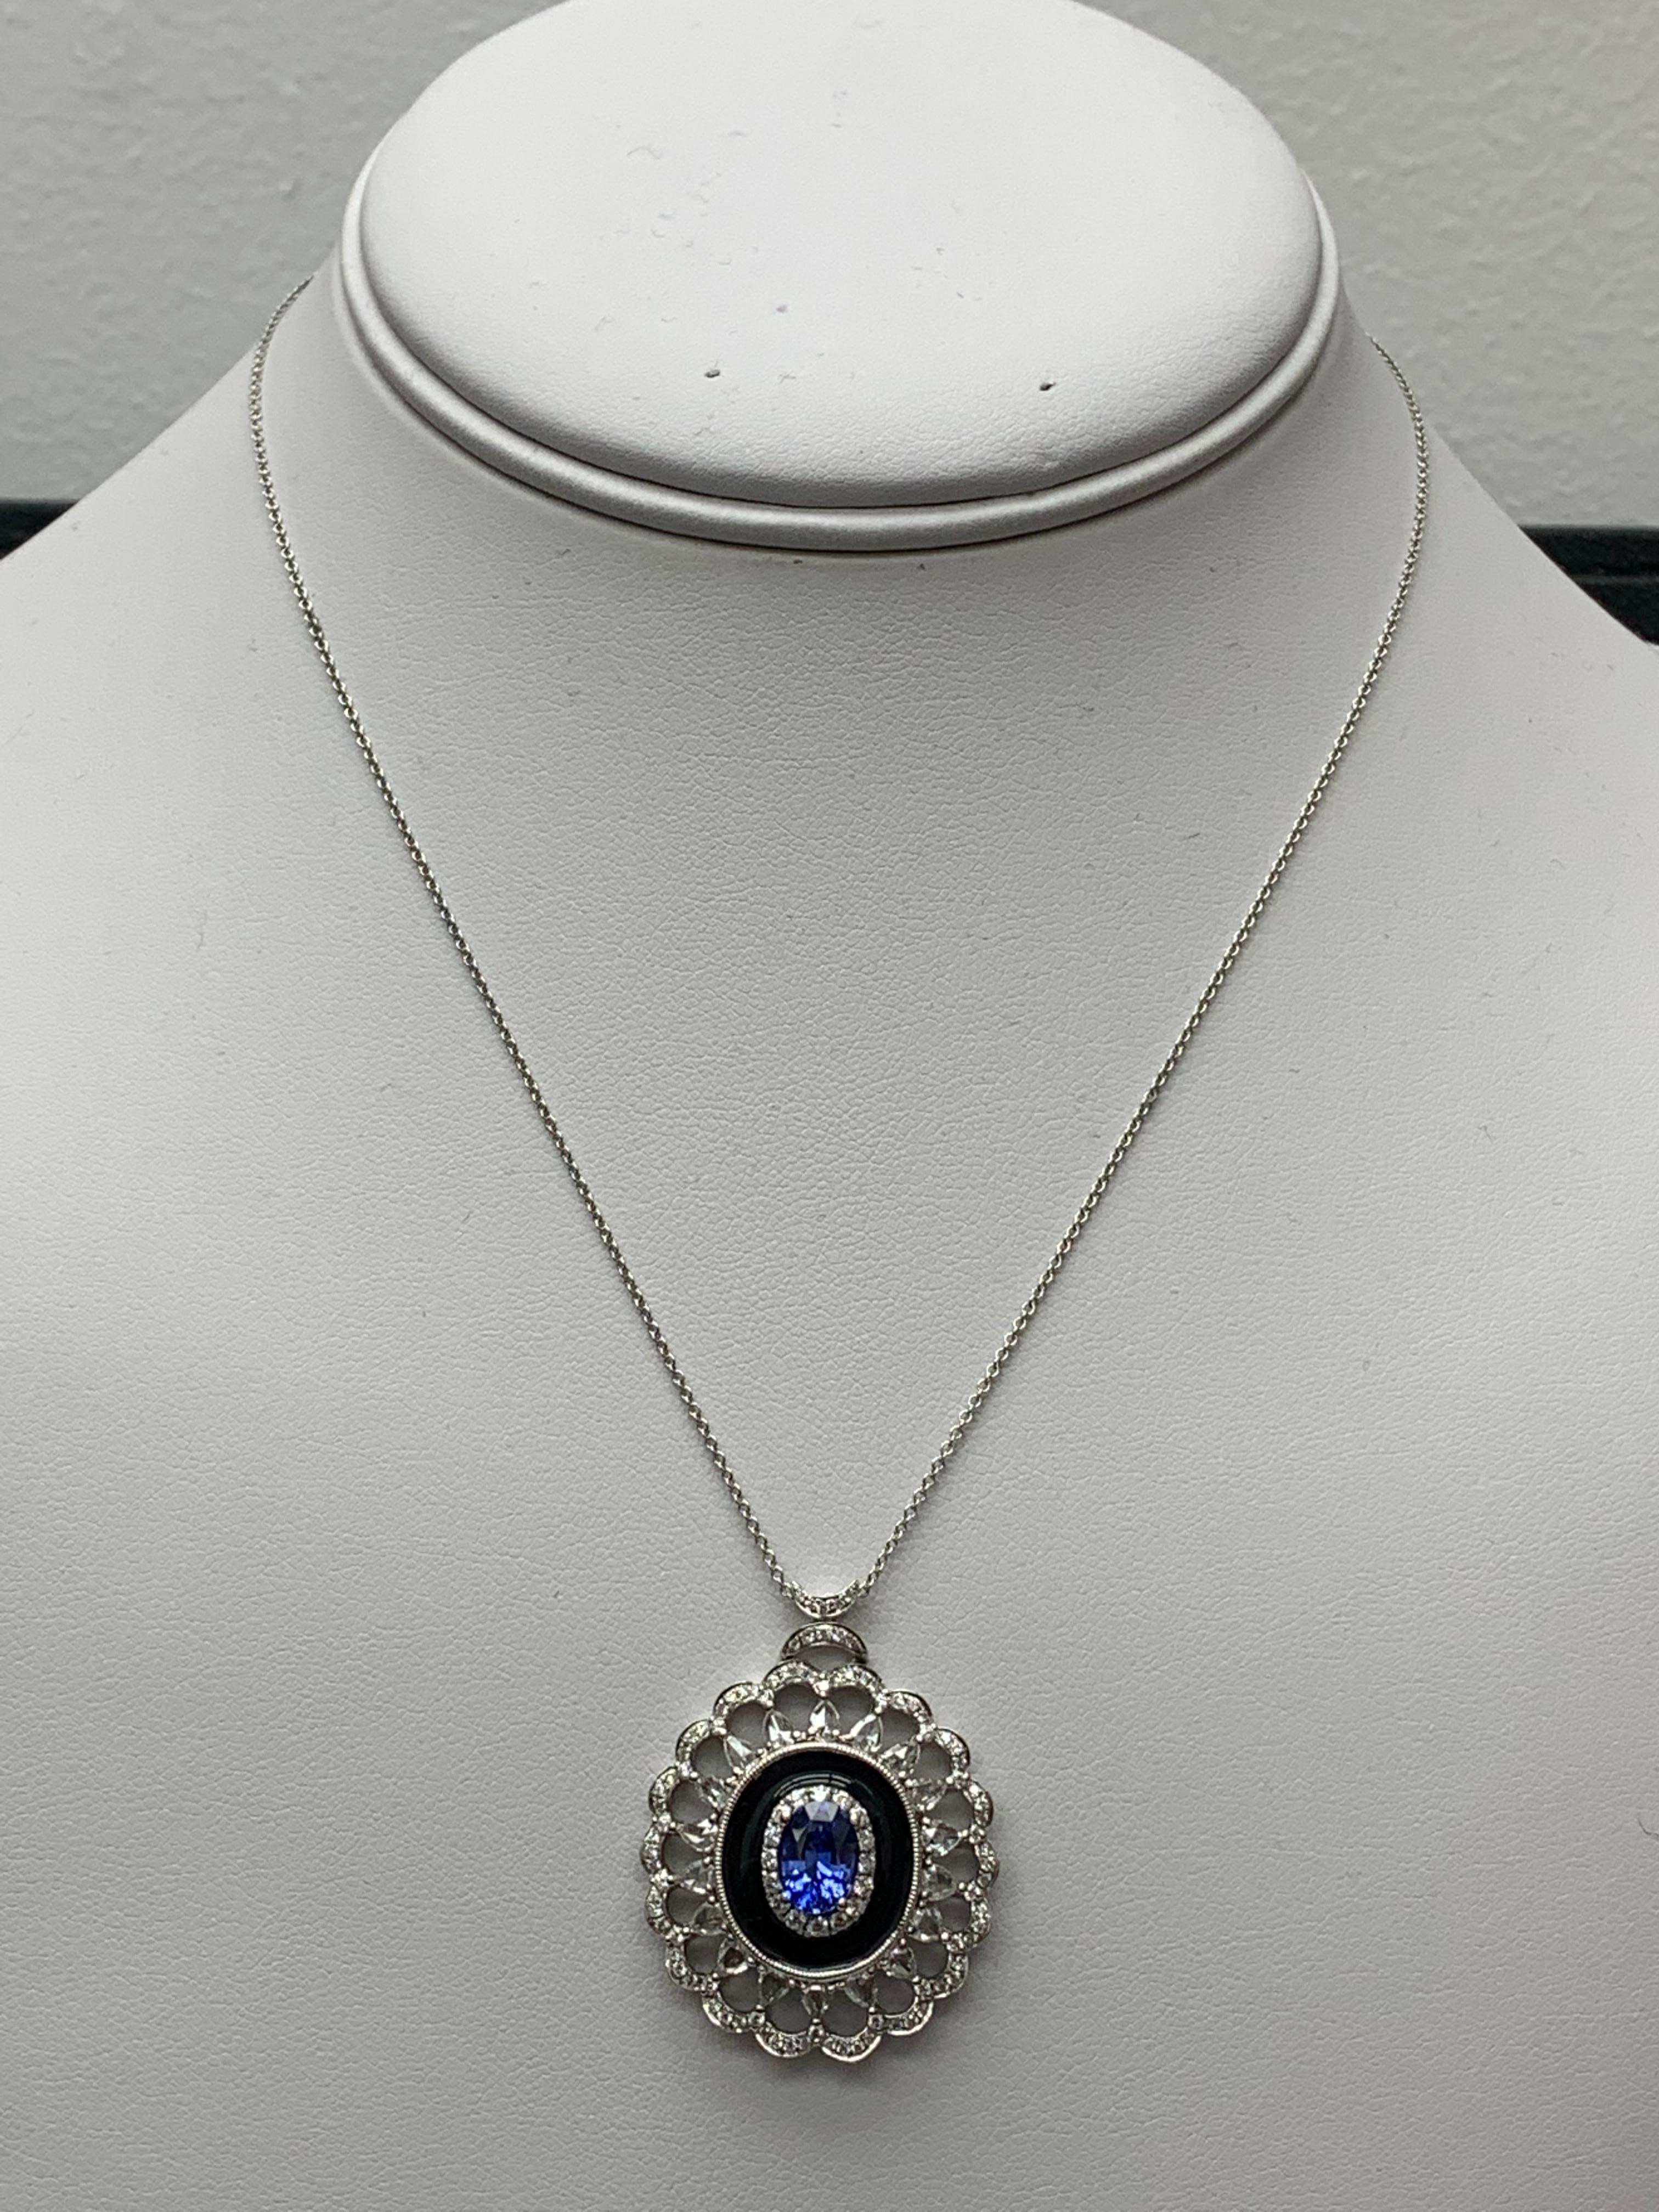 1.50 Carat Oval Cut Sapphire and Diamond Flower Pendant Necklace 18k White Gold For Sale 3